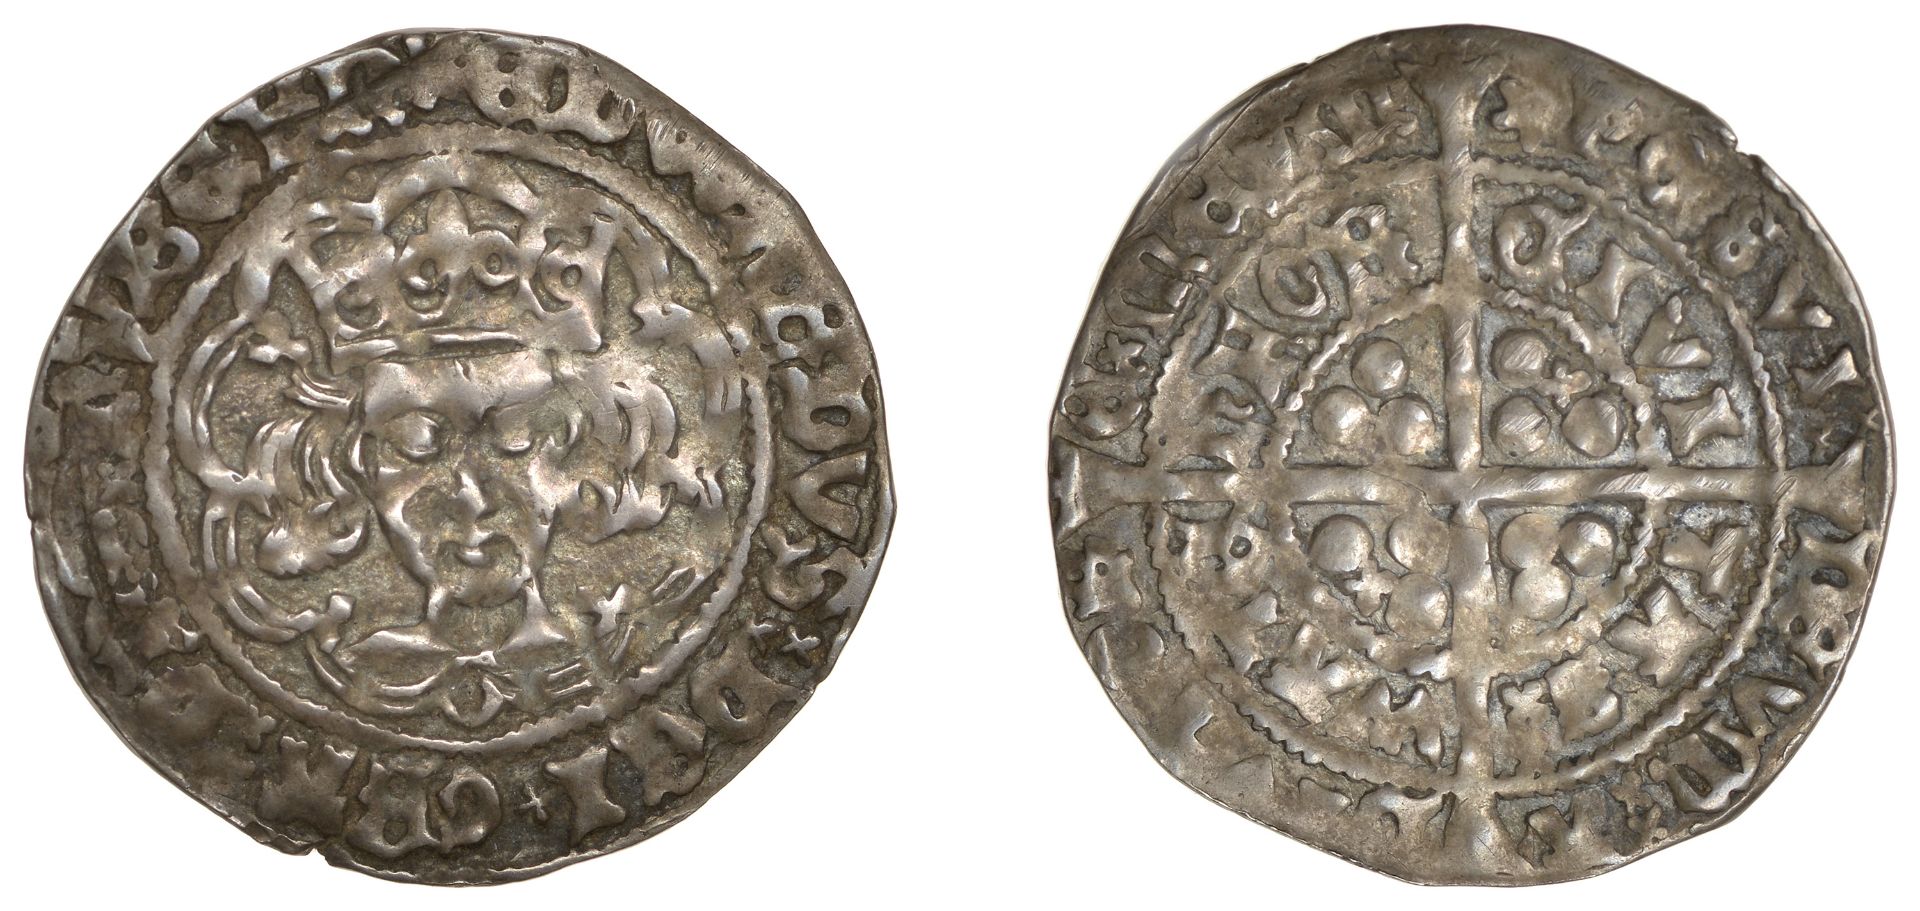 Irish Coins, the Property of a Gentleman